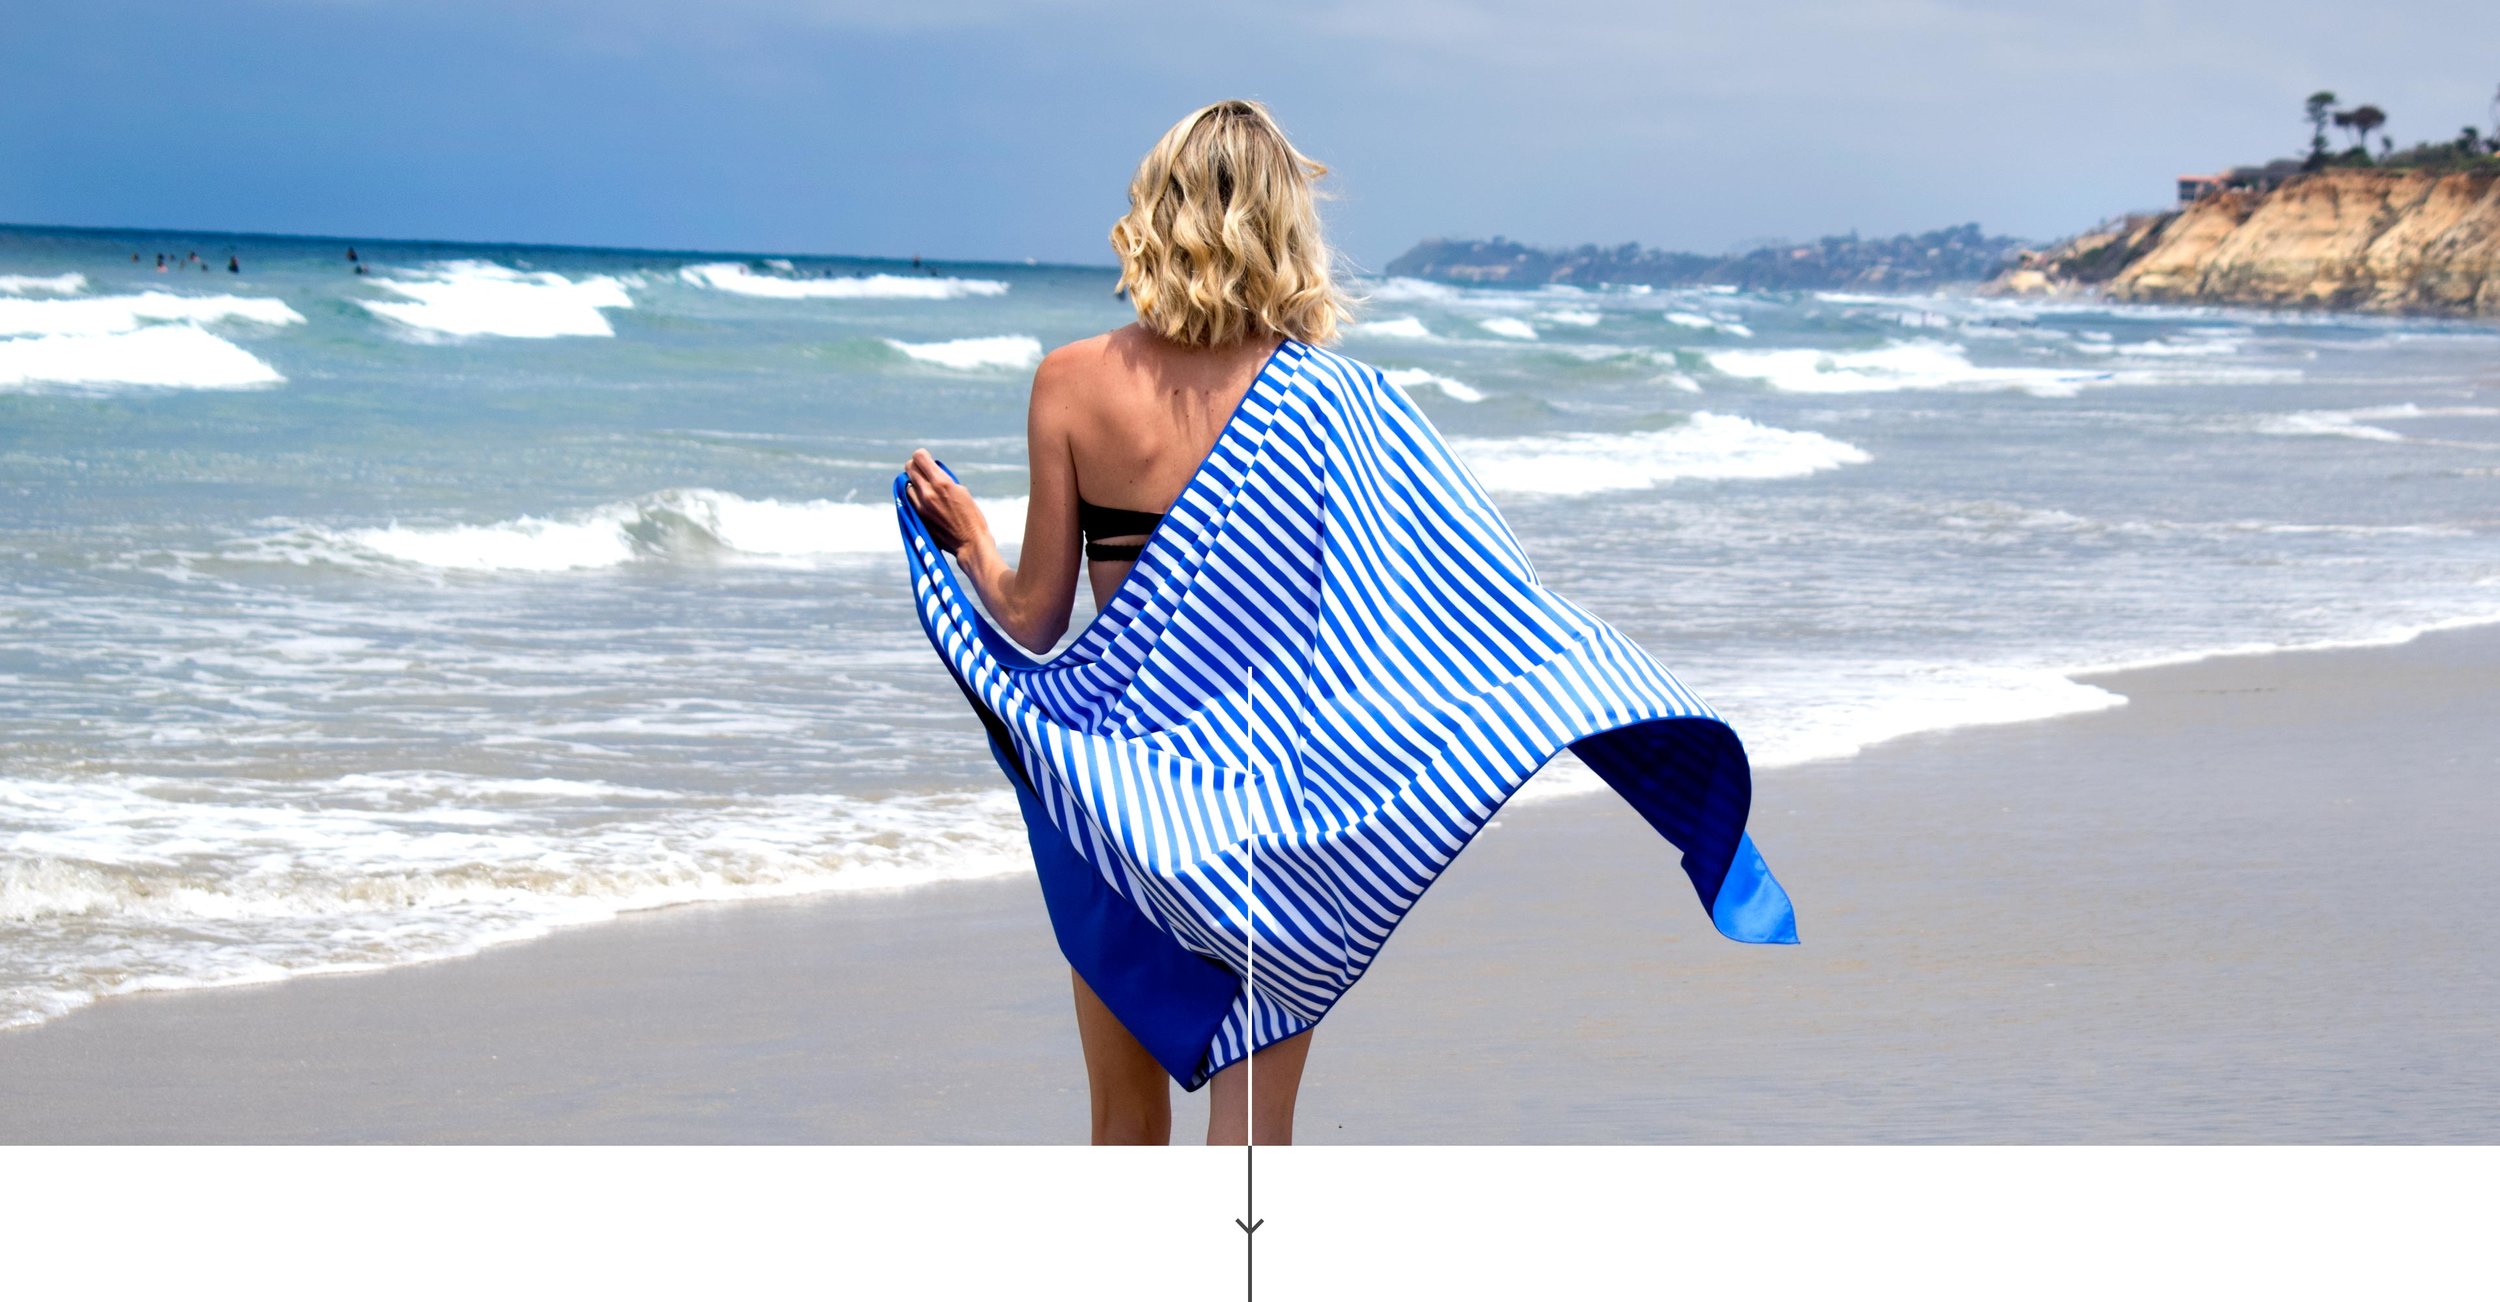 Gym The design is perfect for Beach Lytepark Microfibre Beach Towel Extra Large Swimming & Camping Sports 180cm x 90cm Quick Dry XL Lightweight Towel with Easy Zip Bag Travel Yoga